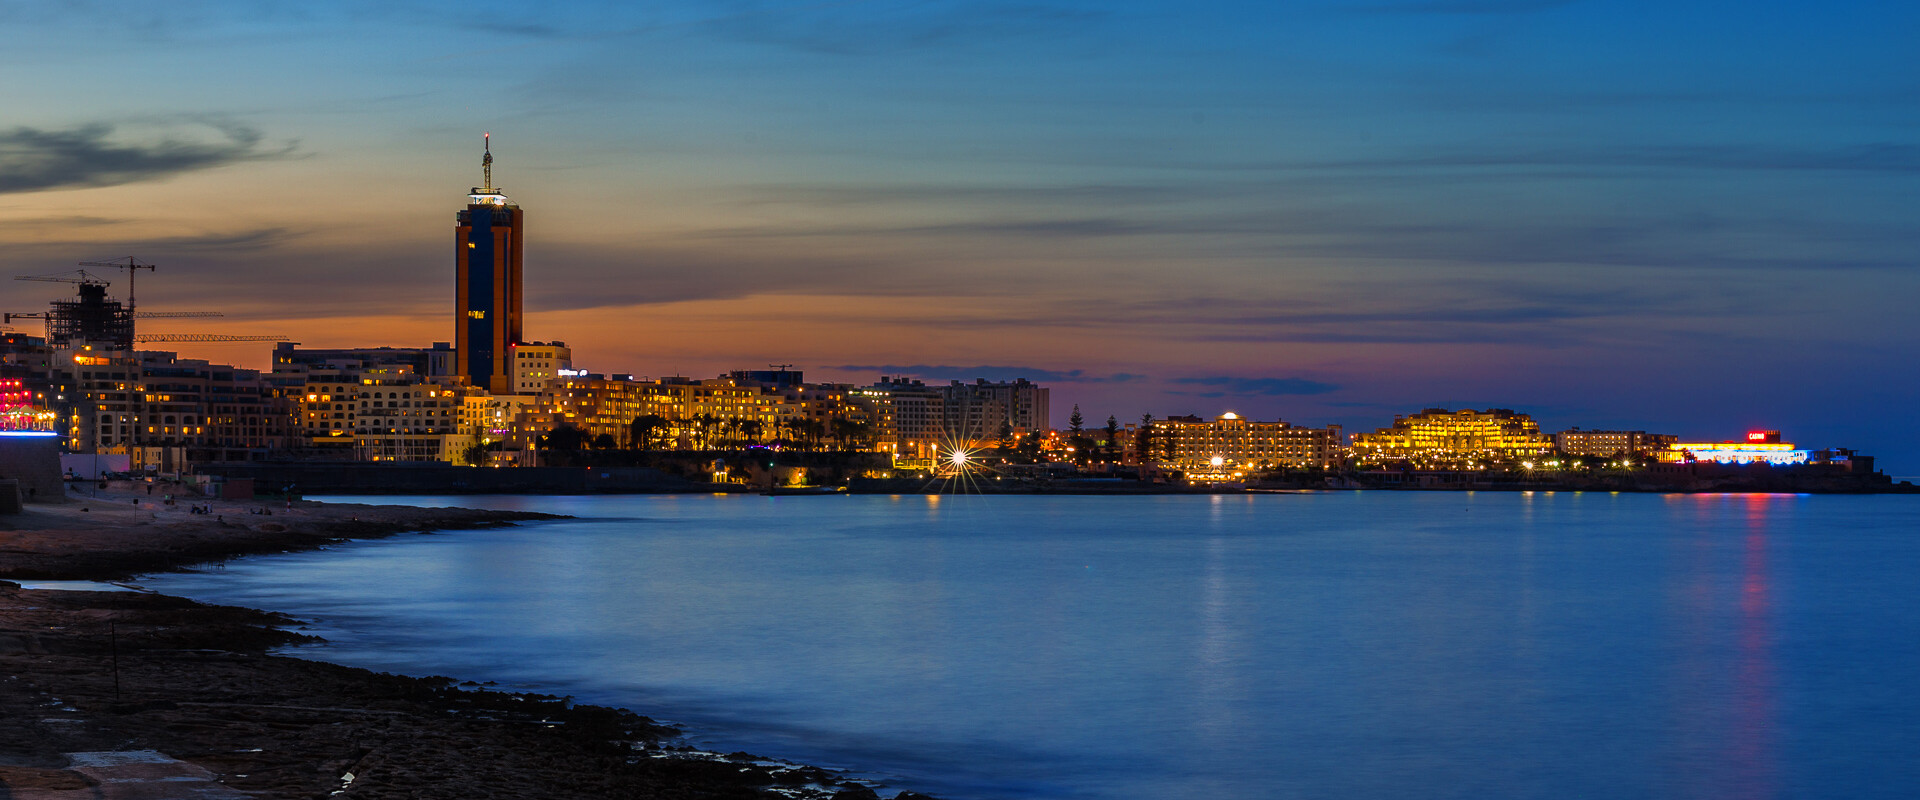 View from the Sliema Seafront at Night